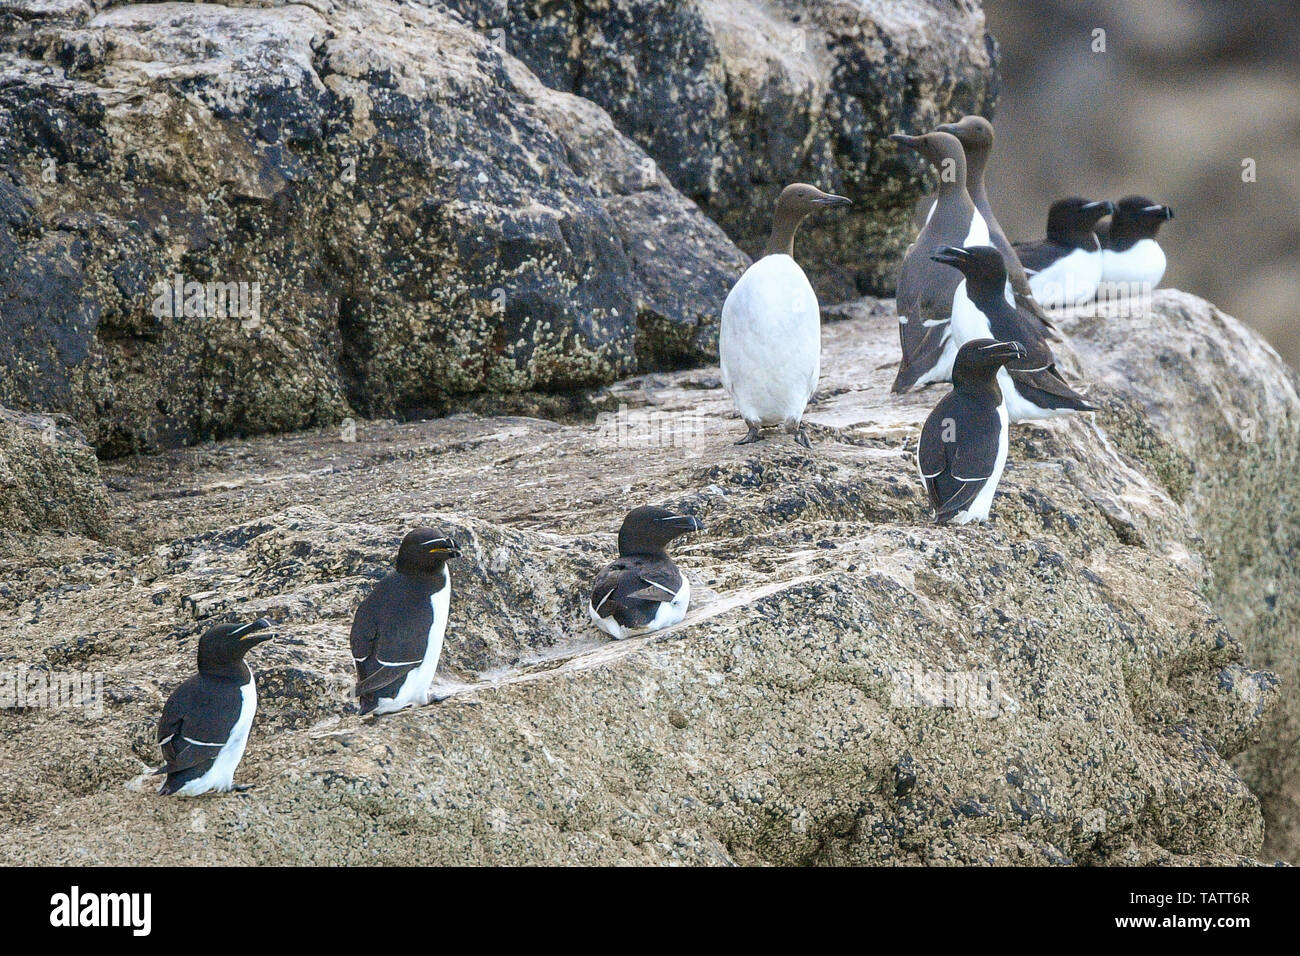 Razorbills and guillemots rest on rocks around Lundy island in the Bristol Channel, off the coast of Devon, where a study led by the RSPB has revealed that total seabird numbers on the island have tripled in the past 15 years to over 21,000 birds. Stock Photo